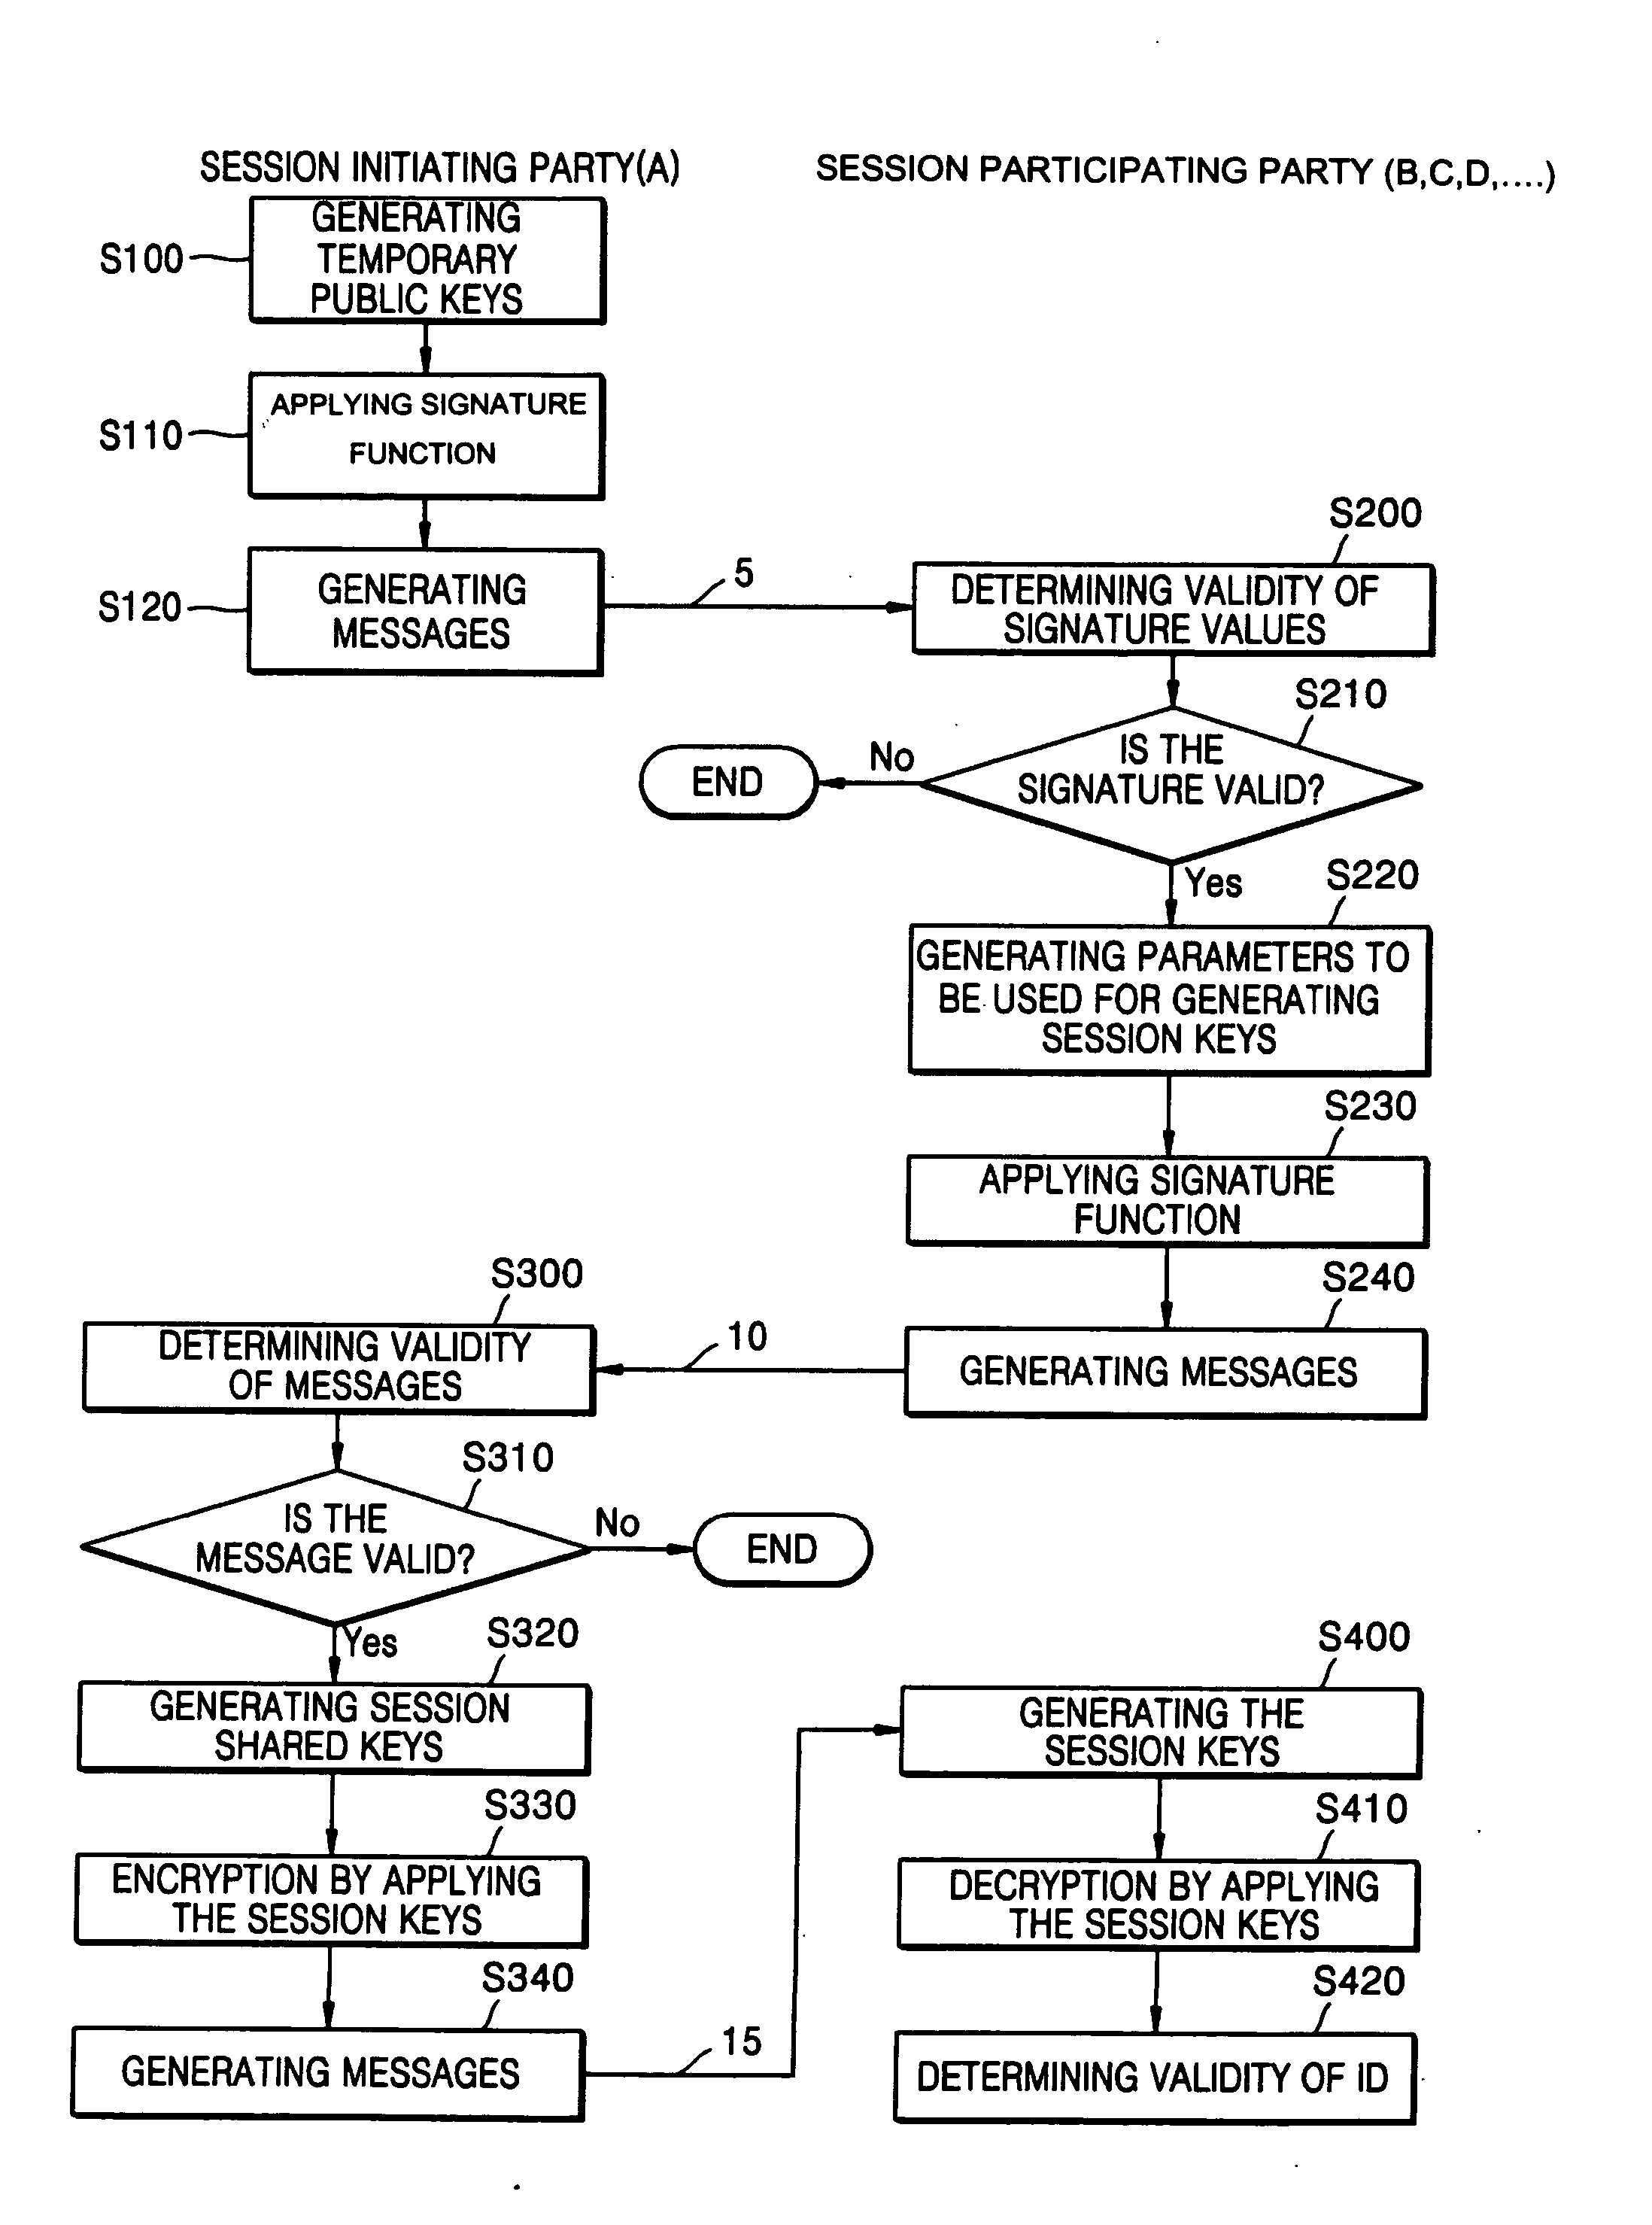 Conference session key distribution method in an ID-based cryptographic system